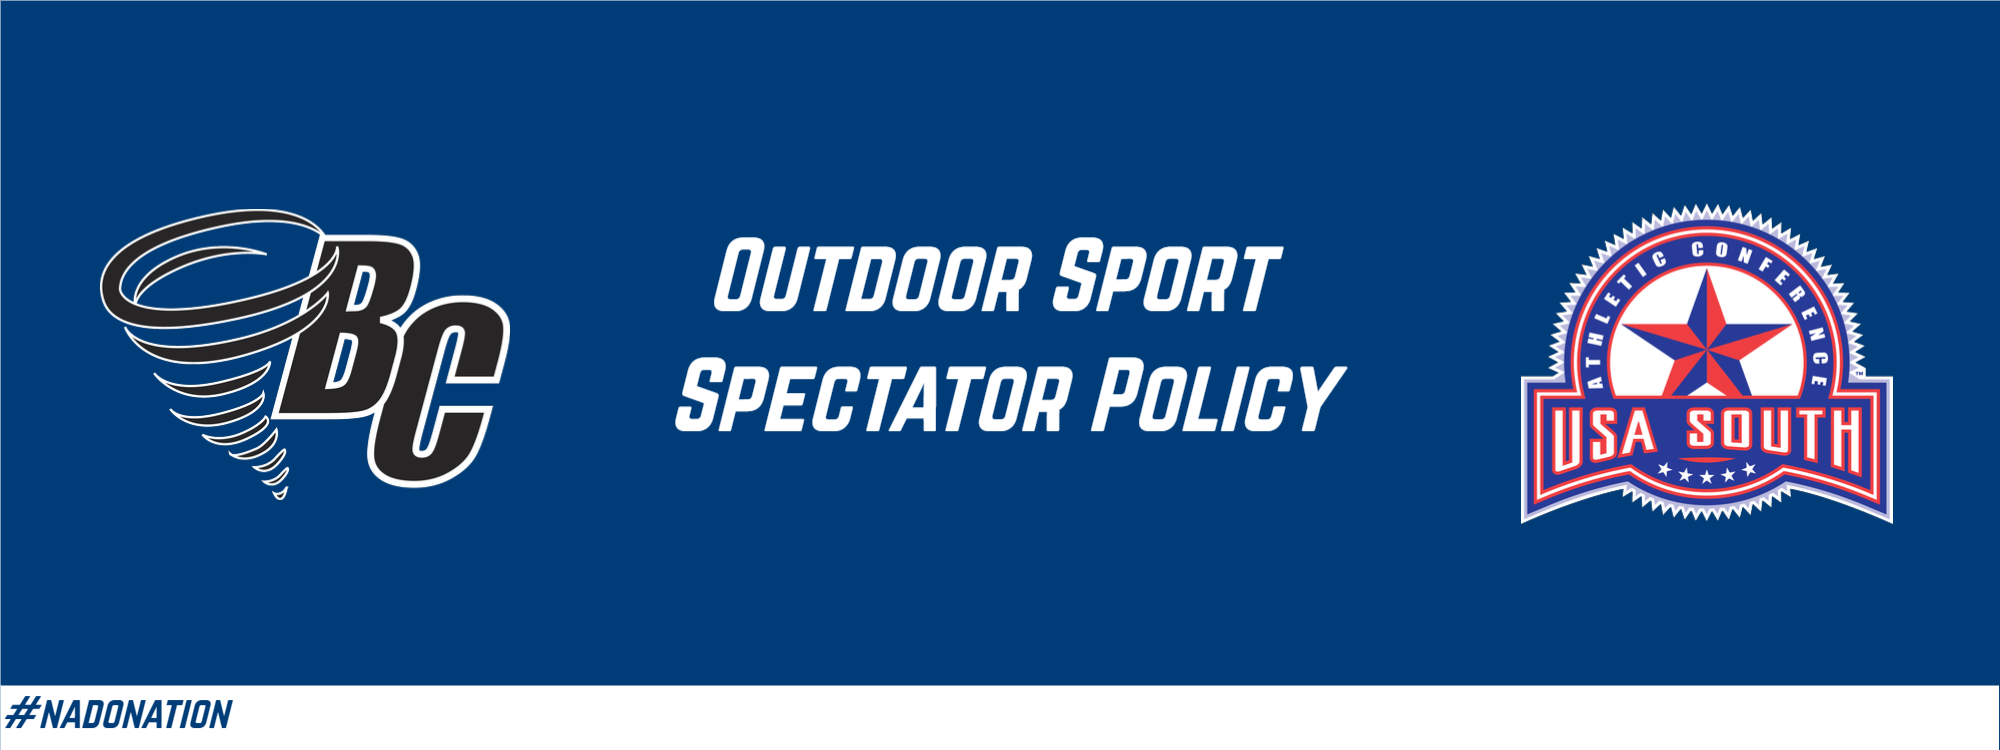 Updated Outdoor Sports Spectator Policy Announced for USA South Conference and Brevard College